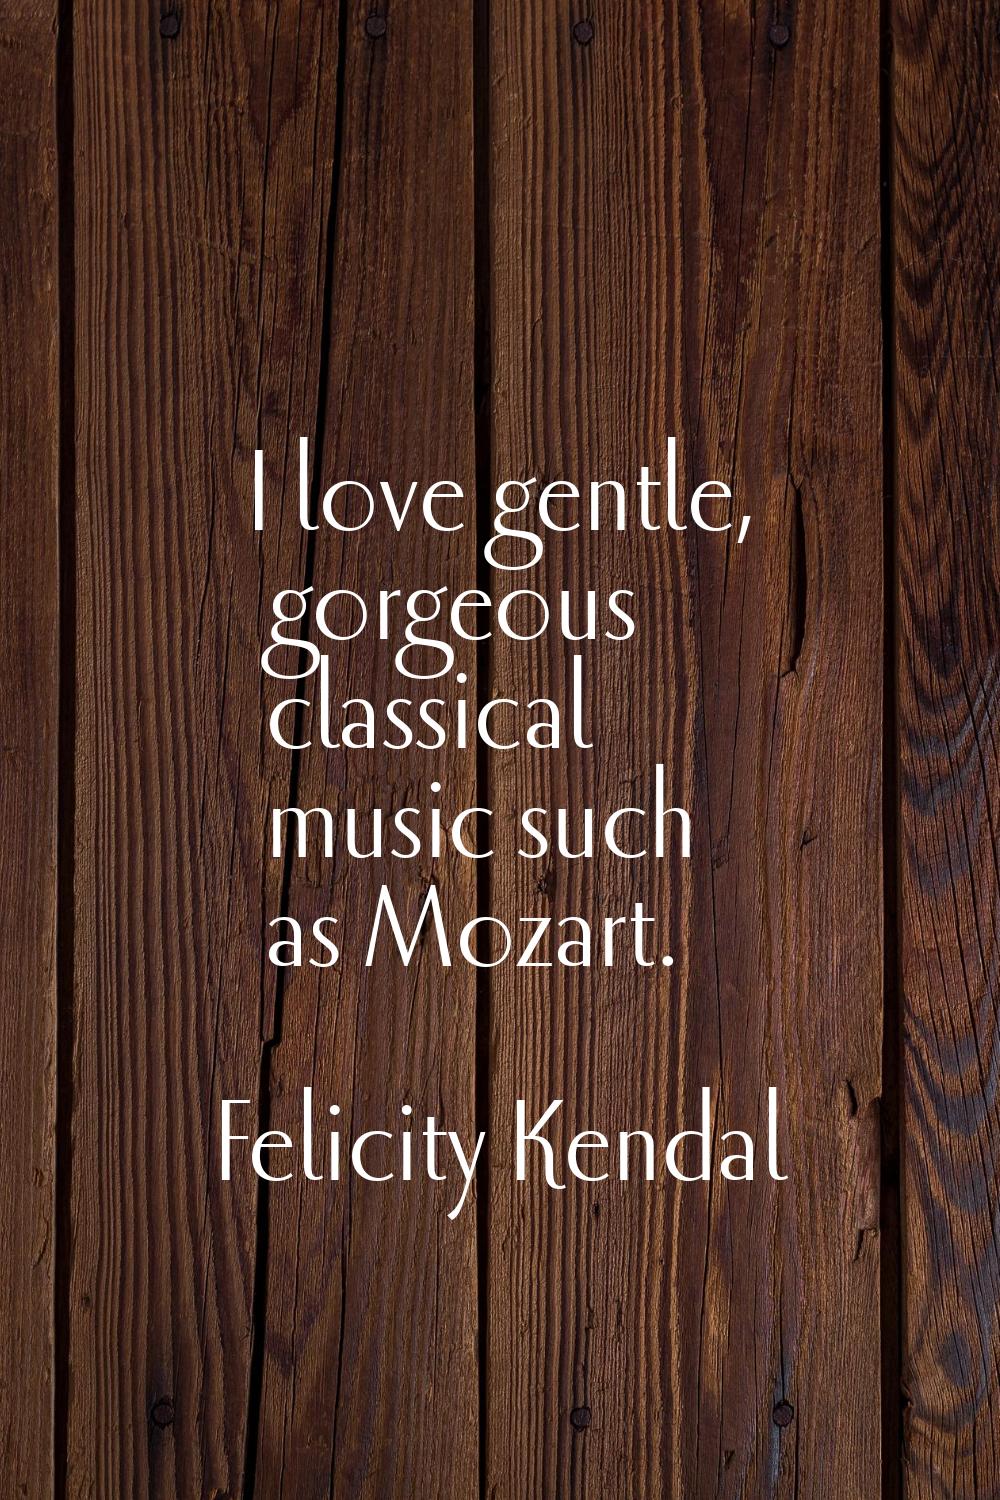 I love gentle, gorgeous classical music such as Mozart.